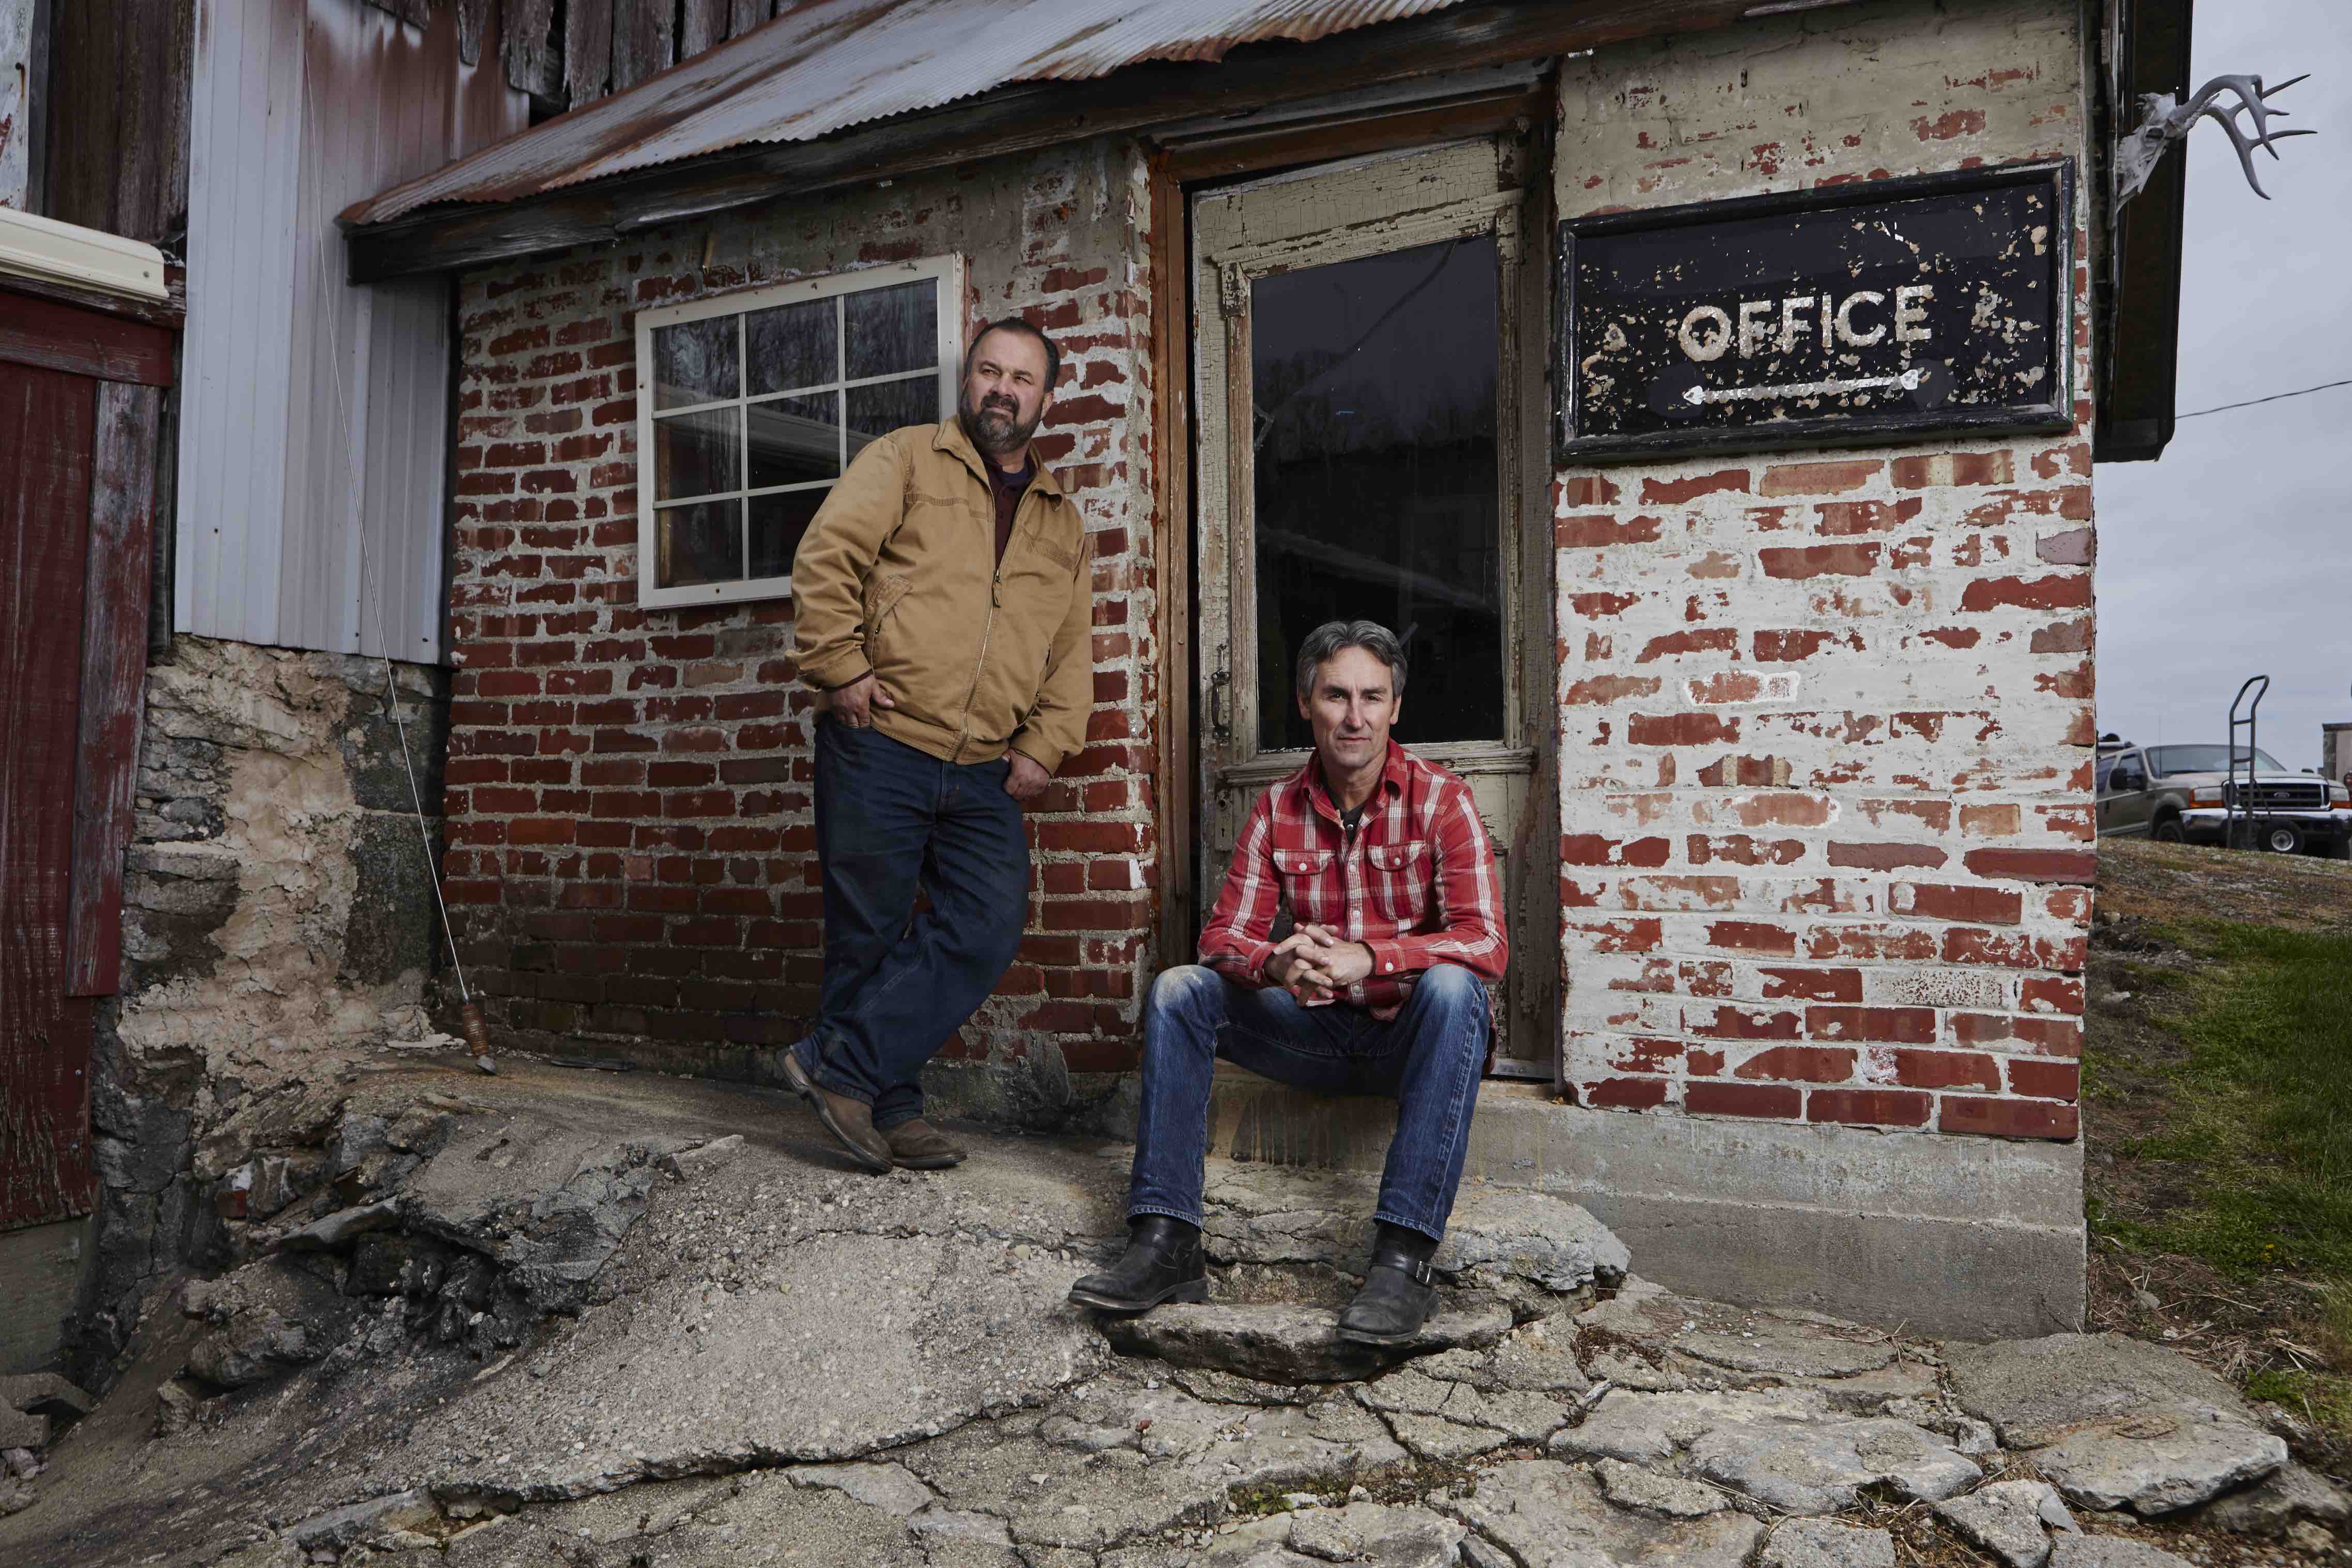 Frank Fritz and Mike Wolfe of the “American Pickers” TV show are looking to explore people's homes